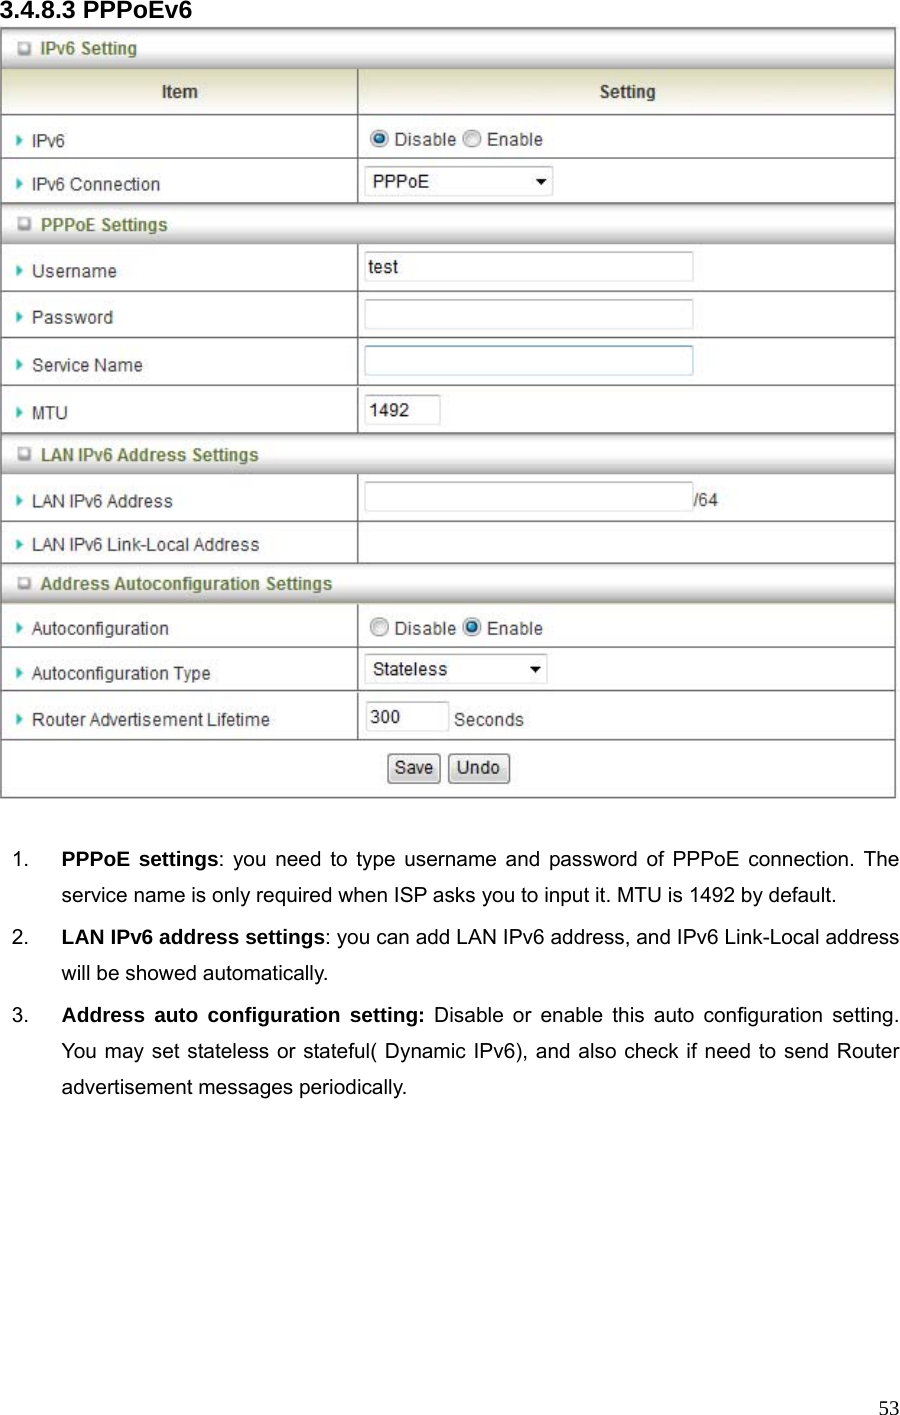  533.4.8.3 PPPoEv6   1.  PPPoE settings: you need to type username and password of PPPoE connection. The service name is only required when ISP asks you to input it. MTU is 1492 by default.   2.  LAN IPv6 address settings: you can add LAN IPv6 address, and IPv6 Link-Local address will be showed automatically. 3.  Address auto configuration setting: Disable or enable this auto configuration setting. You may set stateless or stateful( Dynamic IPv6), and also check if need to send Router advertisement messages periodically.       